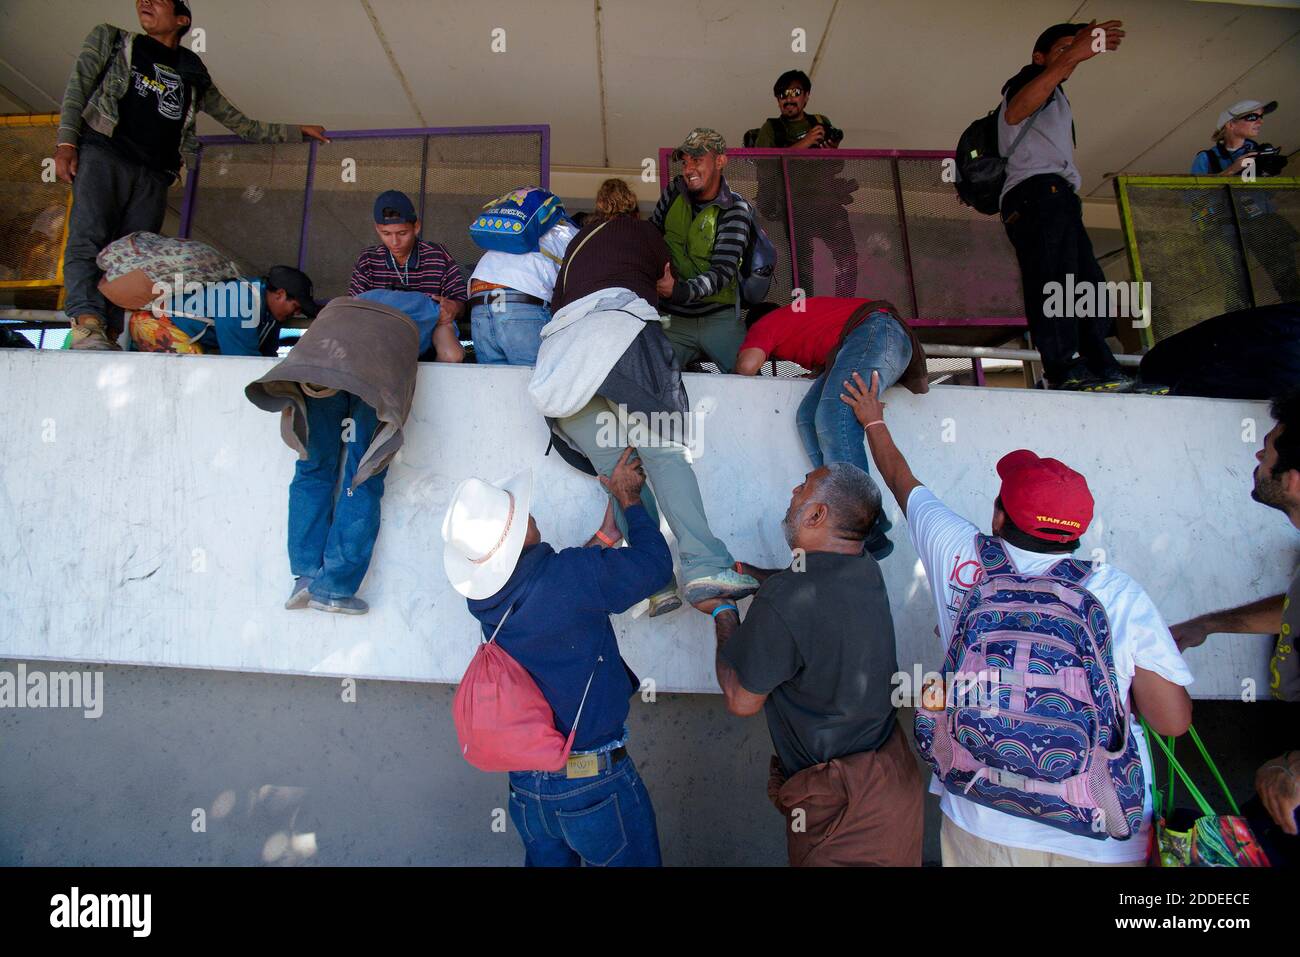 NO FILM, NO VIDEO, NO TV, NO DOCUMENTARY - Migrants with the Central American caravan breach police line set up by the Mexico Federal Police, then try to access the San Ysidro Port of Entry. Photo by Nelvin C. Cepeda/San Diego Union-Tribune/TNS/ABACAPRESS.COM Stock Photo